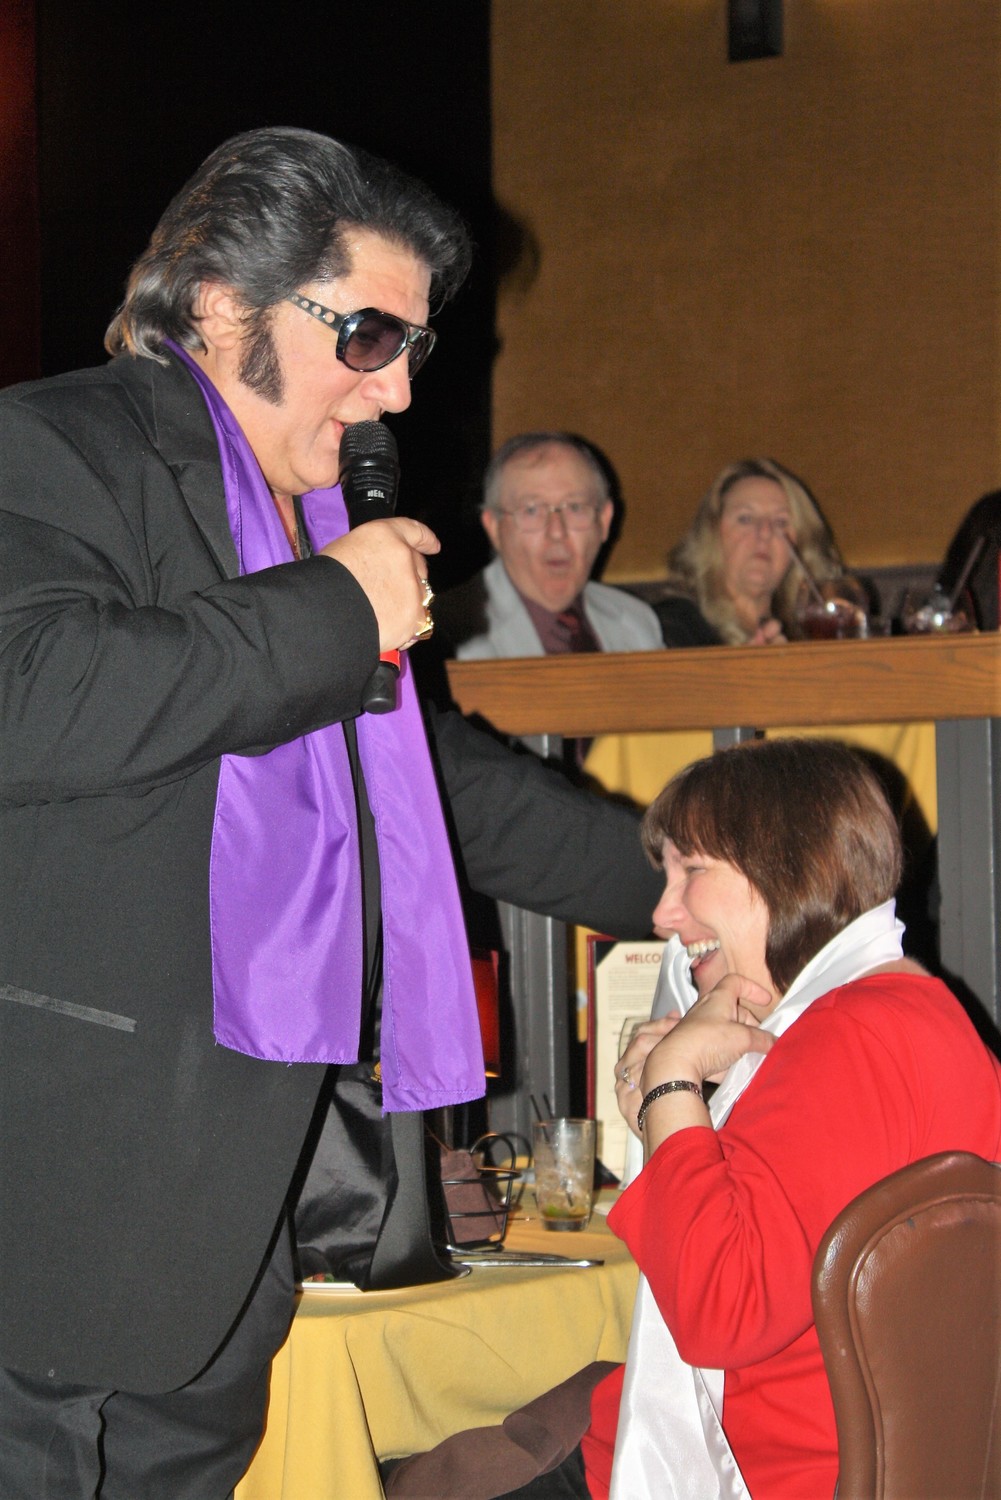 Elvis Presley (portrayed by Rick Marino) works the crowd, bestowing an audience member with a scarf.